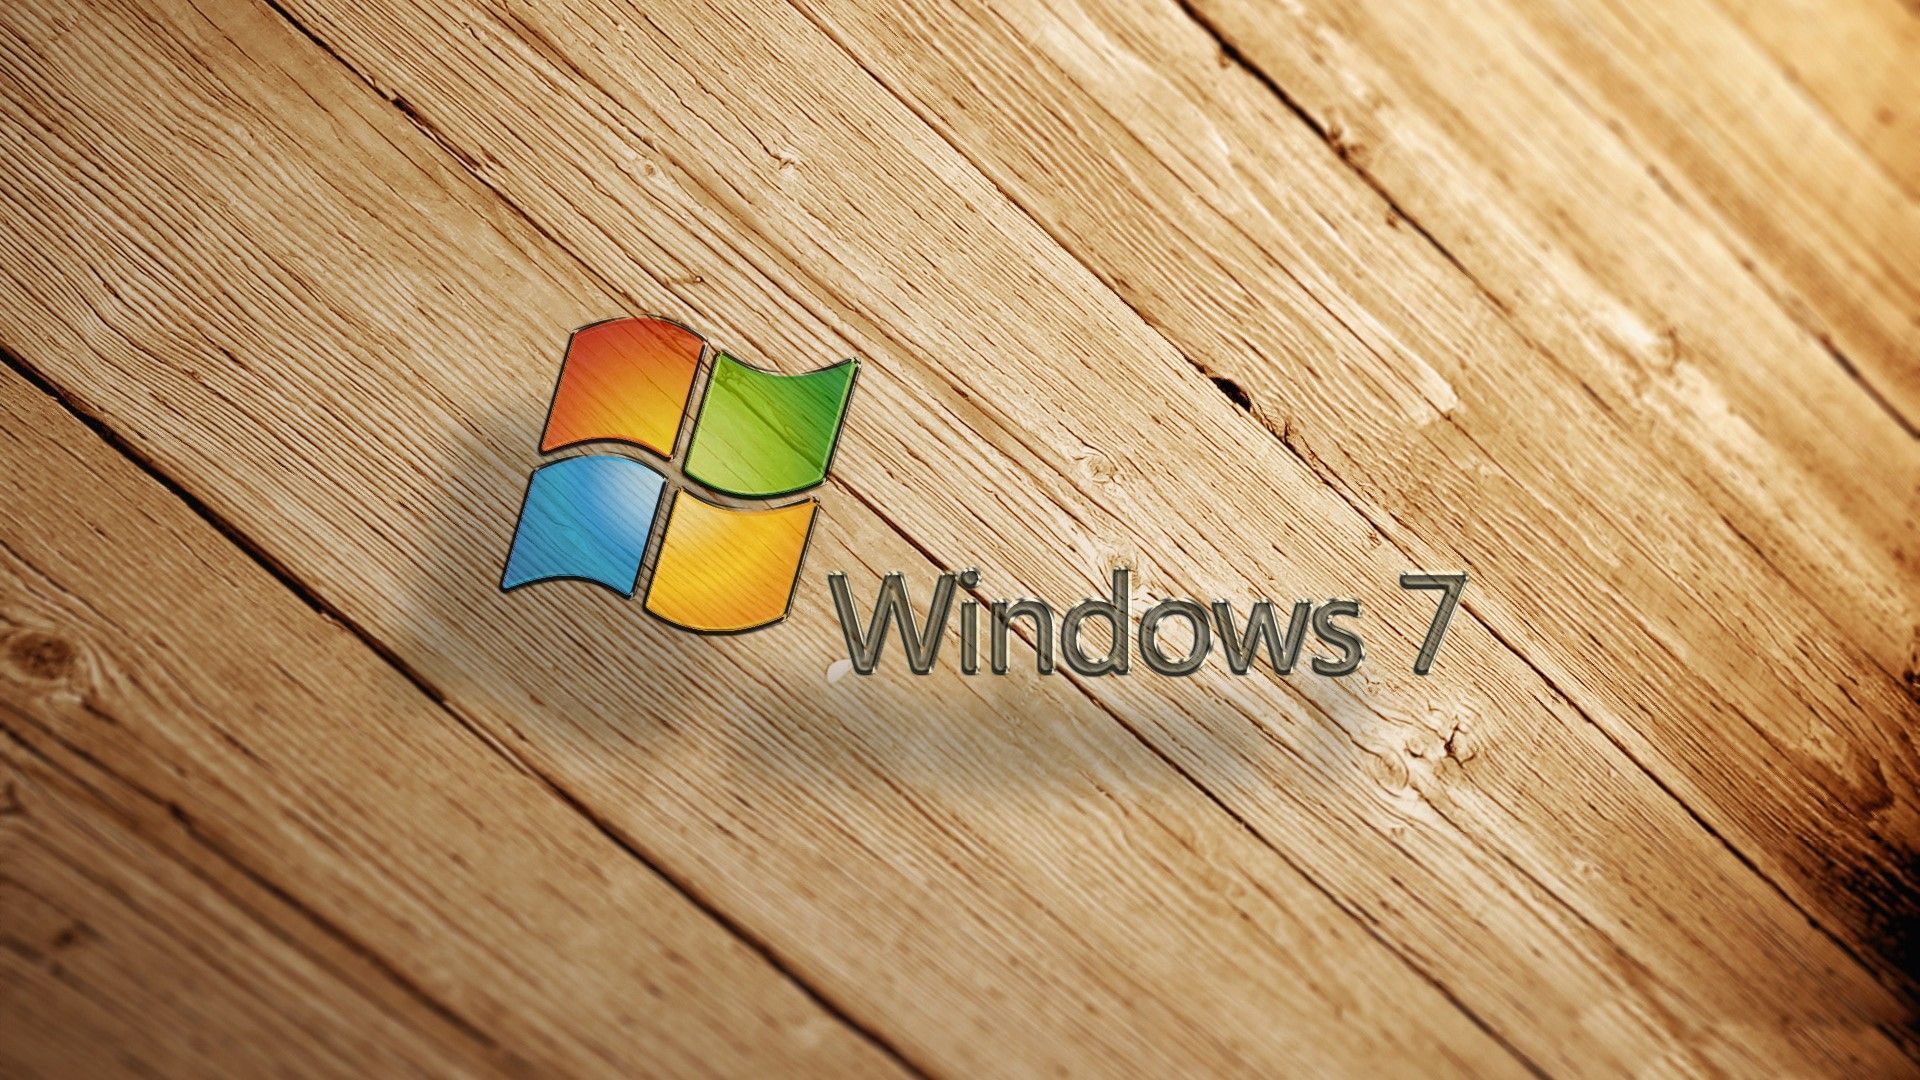 Download Windows 7 Wood Background Wallpaper Free By udhao.net